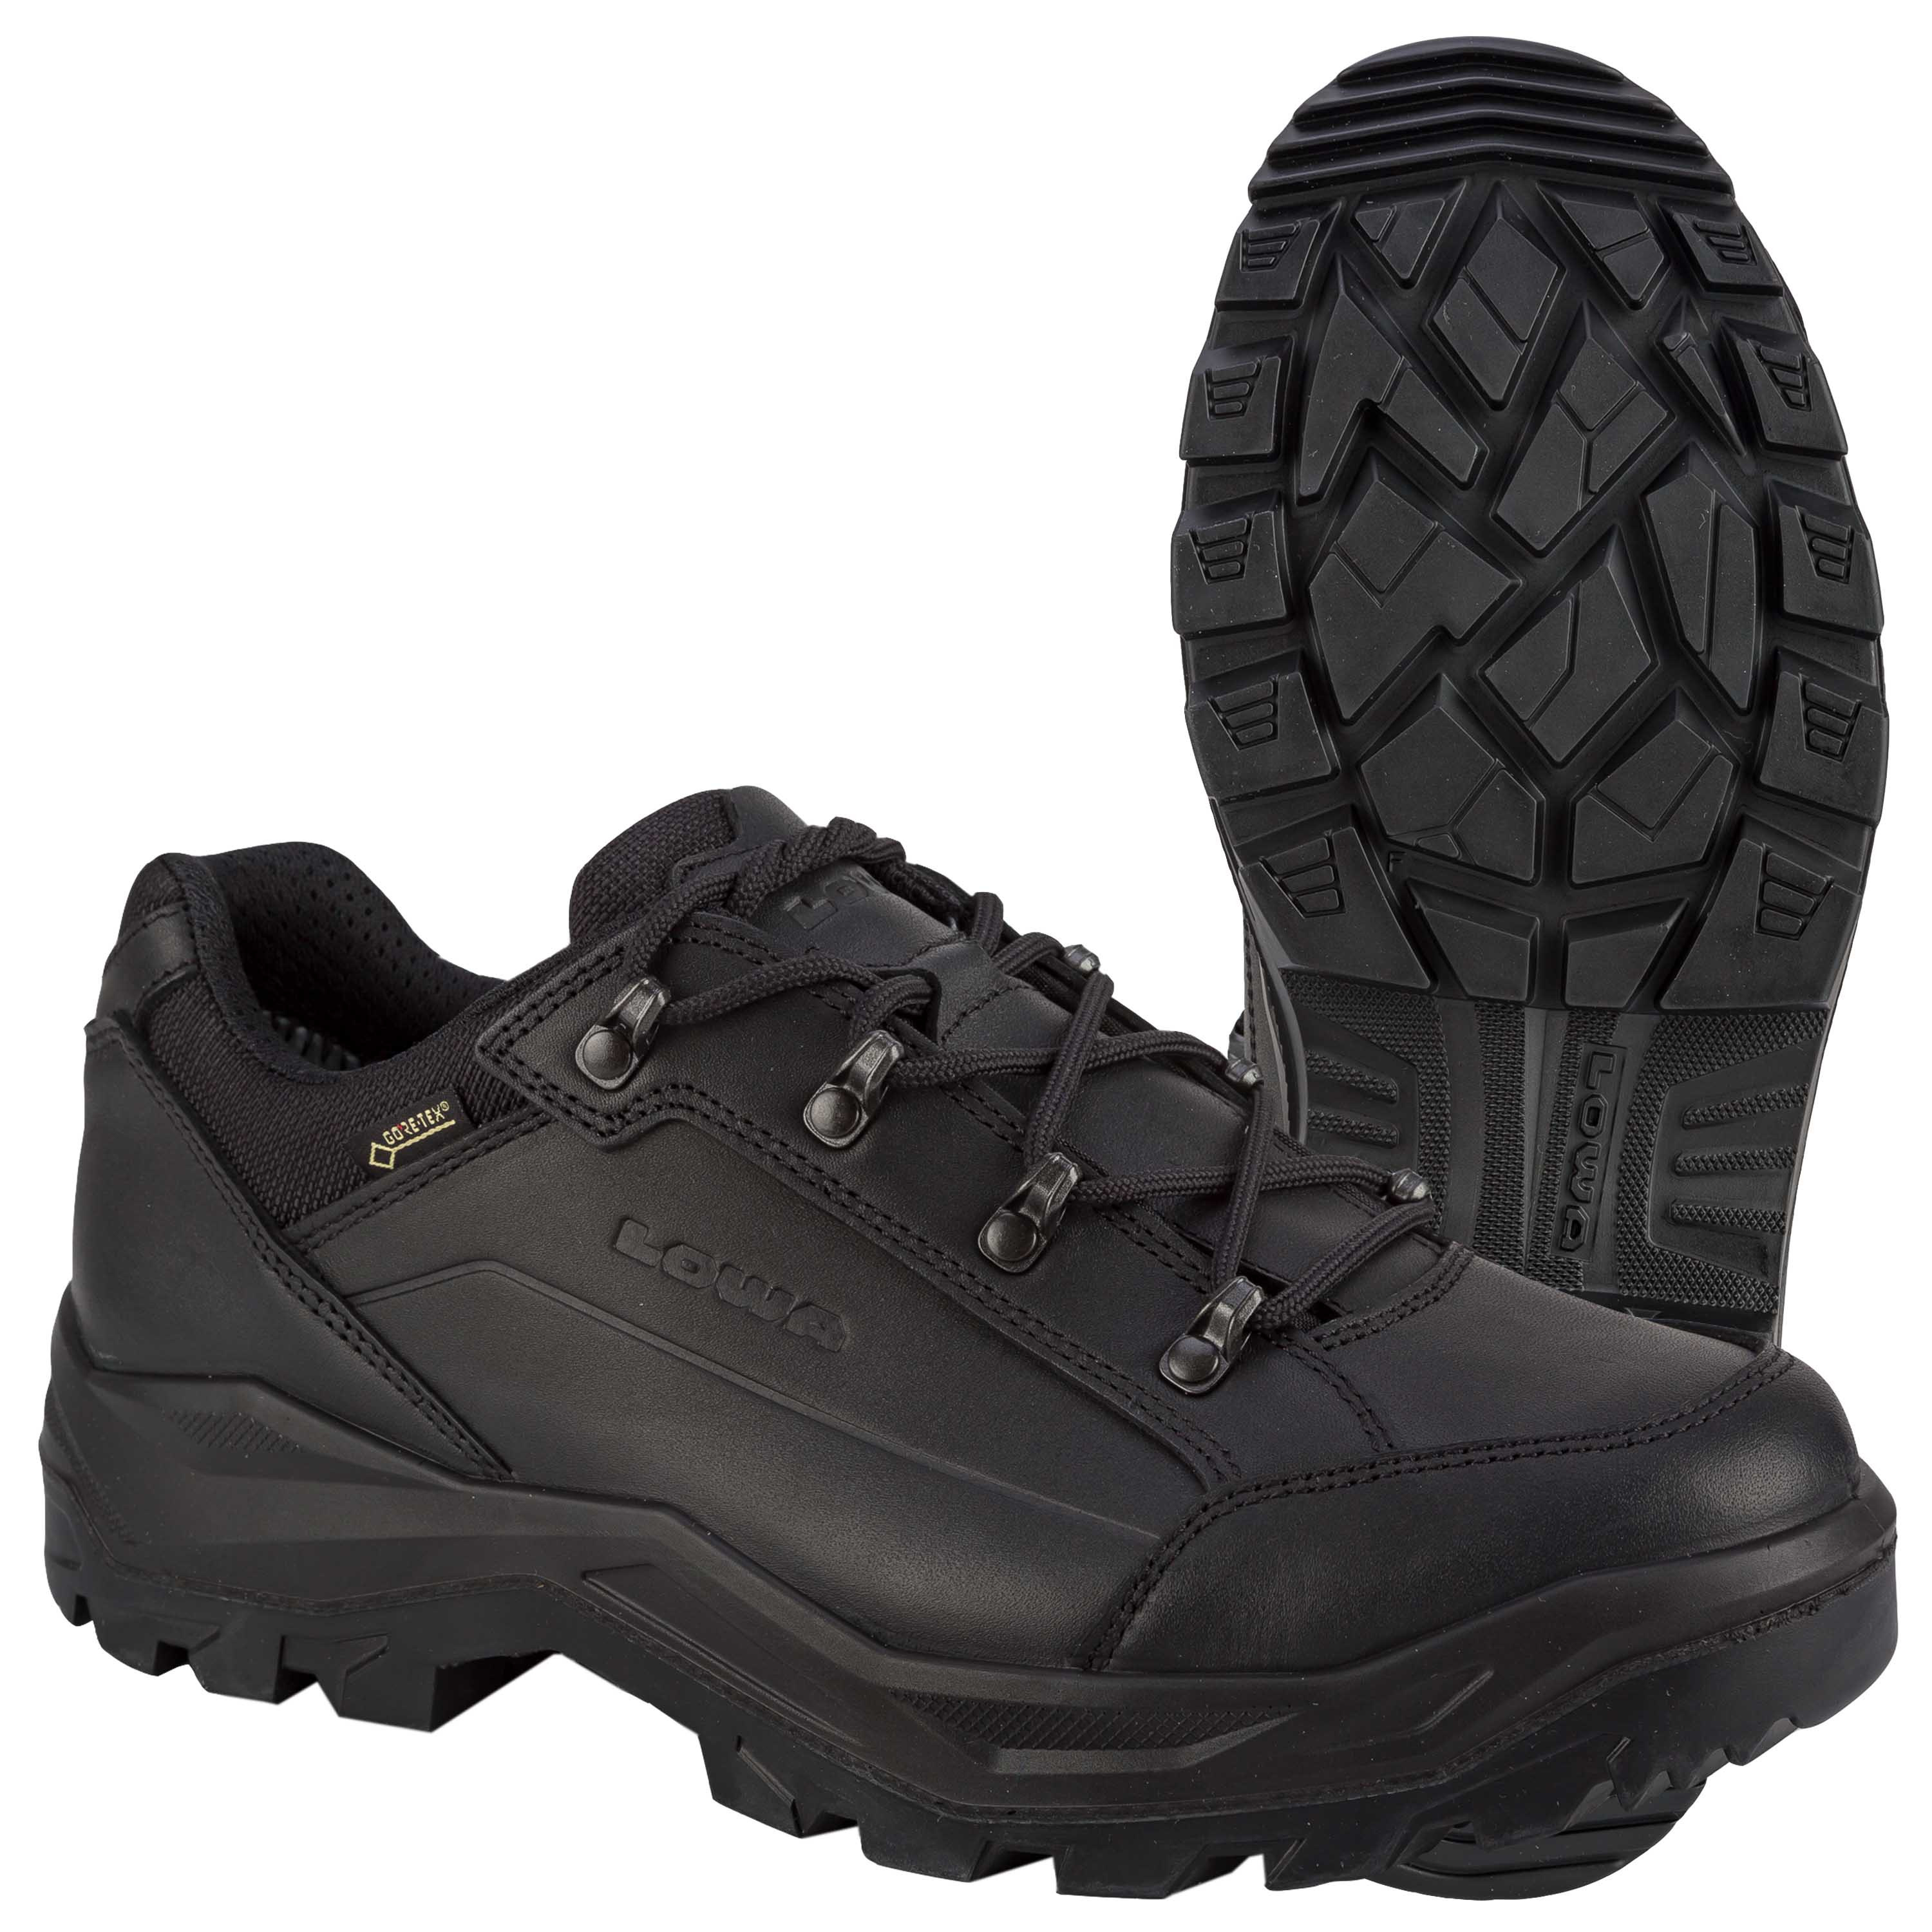 Chaussures de protection basses RENEGADE II GTX LO TF MF - "500612"